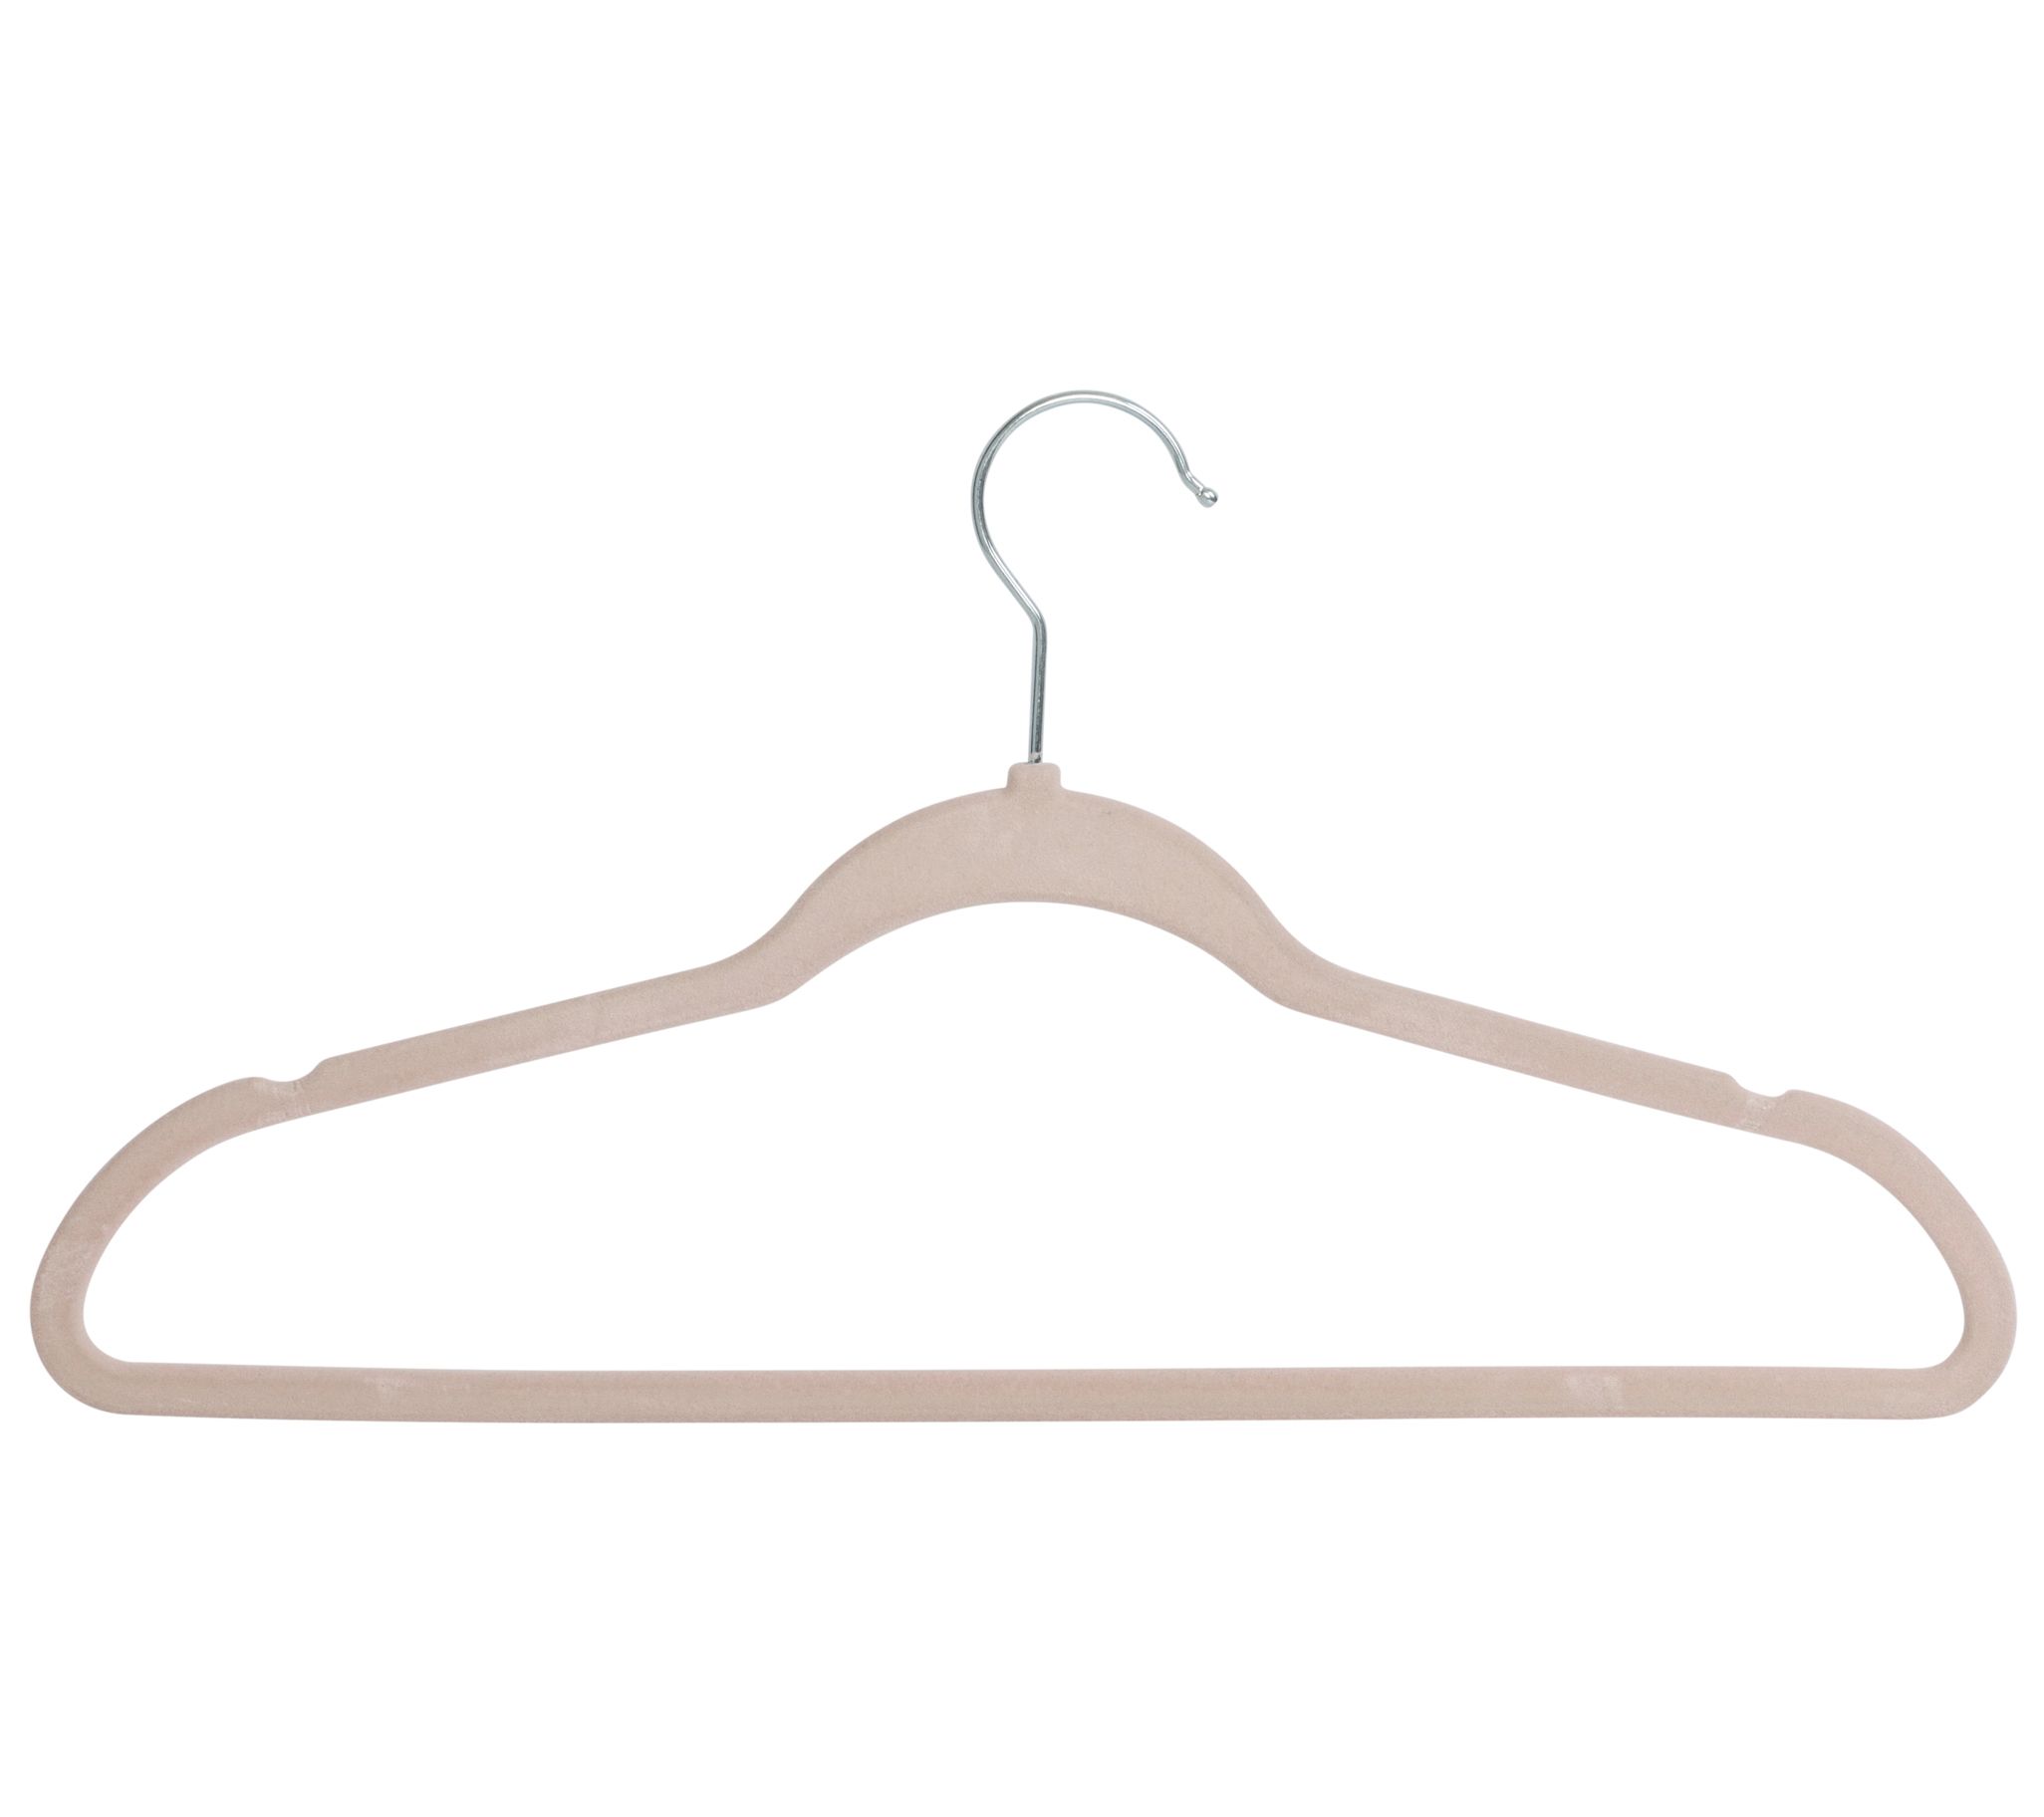 Quality White Hangers 100-Pack - Super Heavy Duty Plastic Clothes